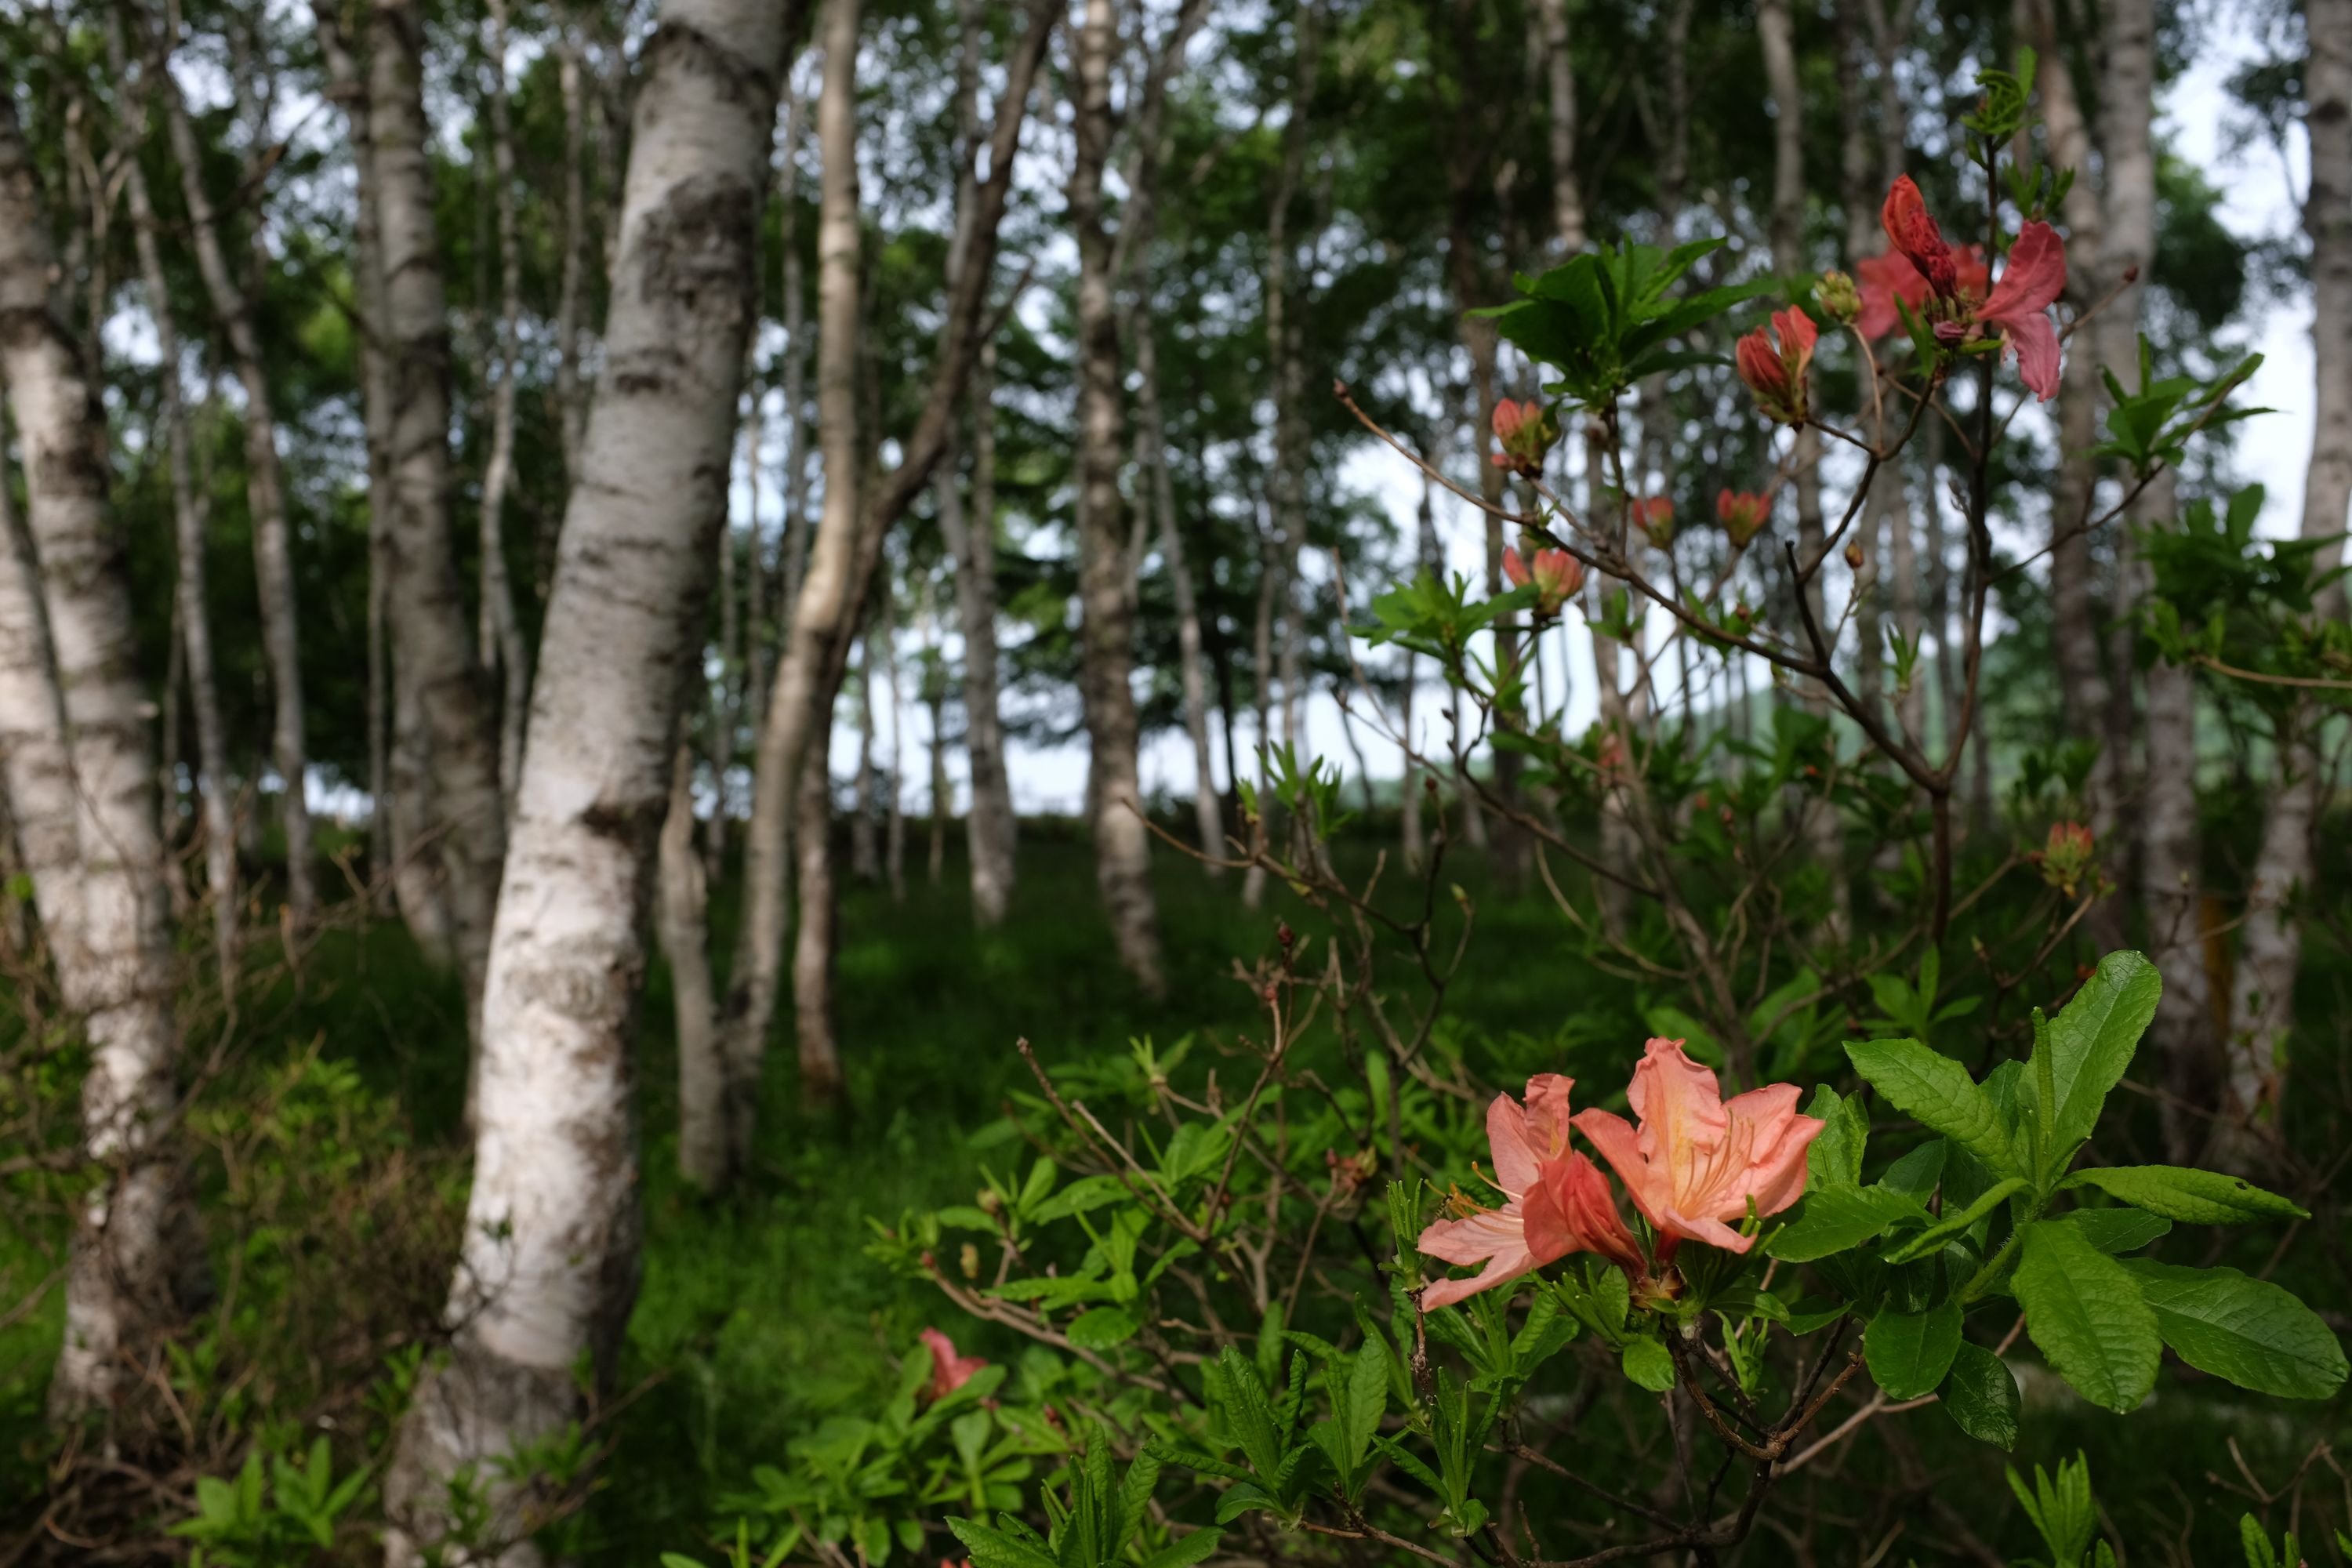 An undergrowth of salmon-colored azaleas in a birch forest.